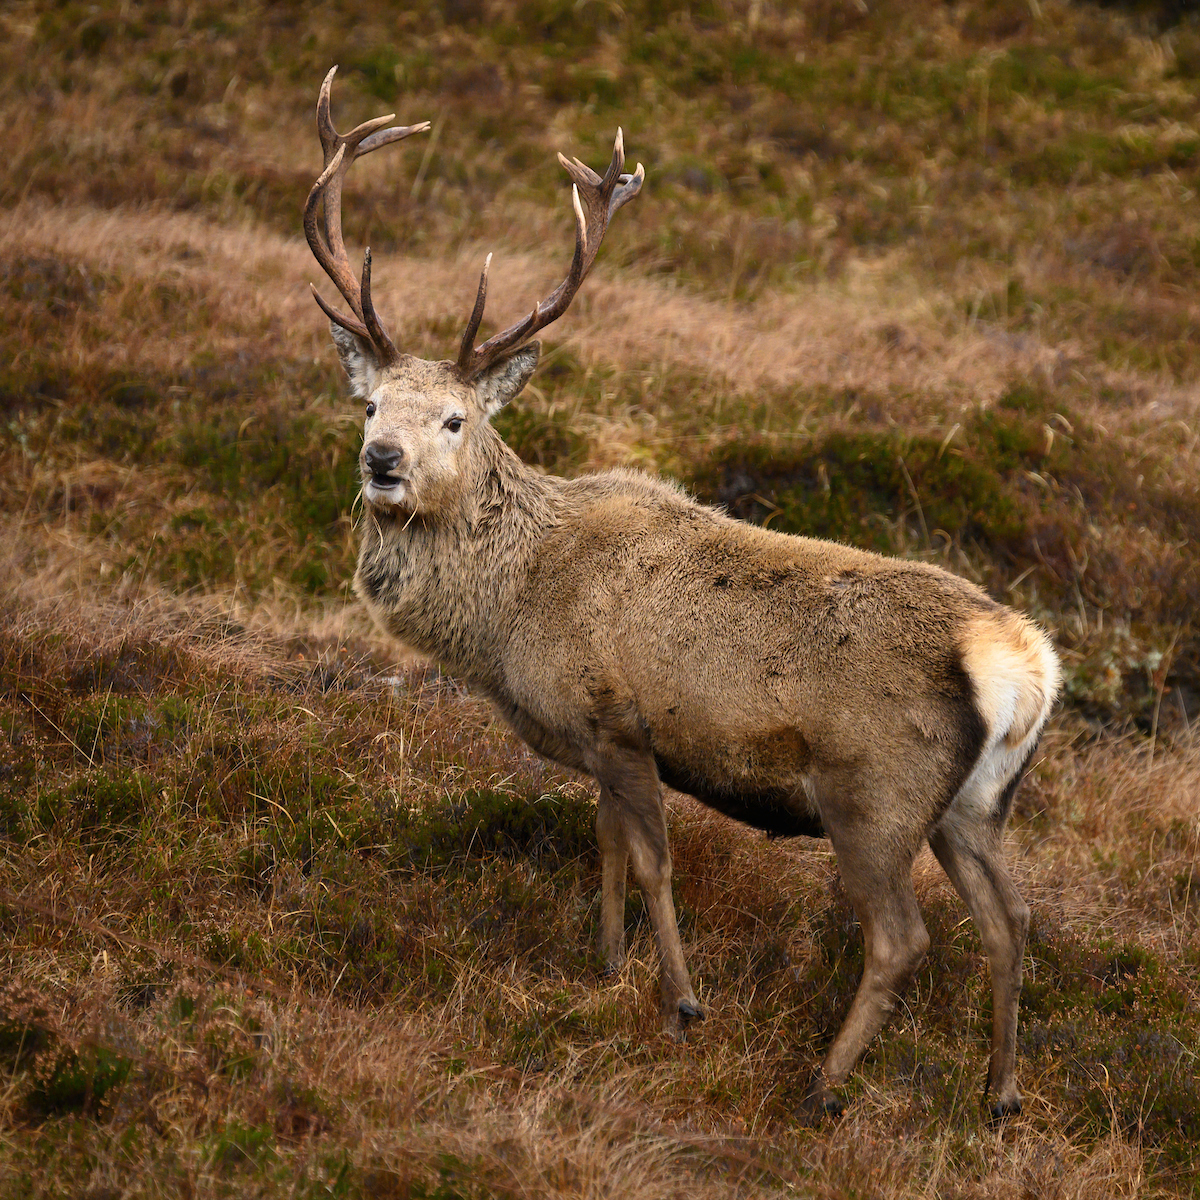 Red deer stag or buck with large antlers looking at the camera